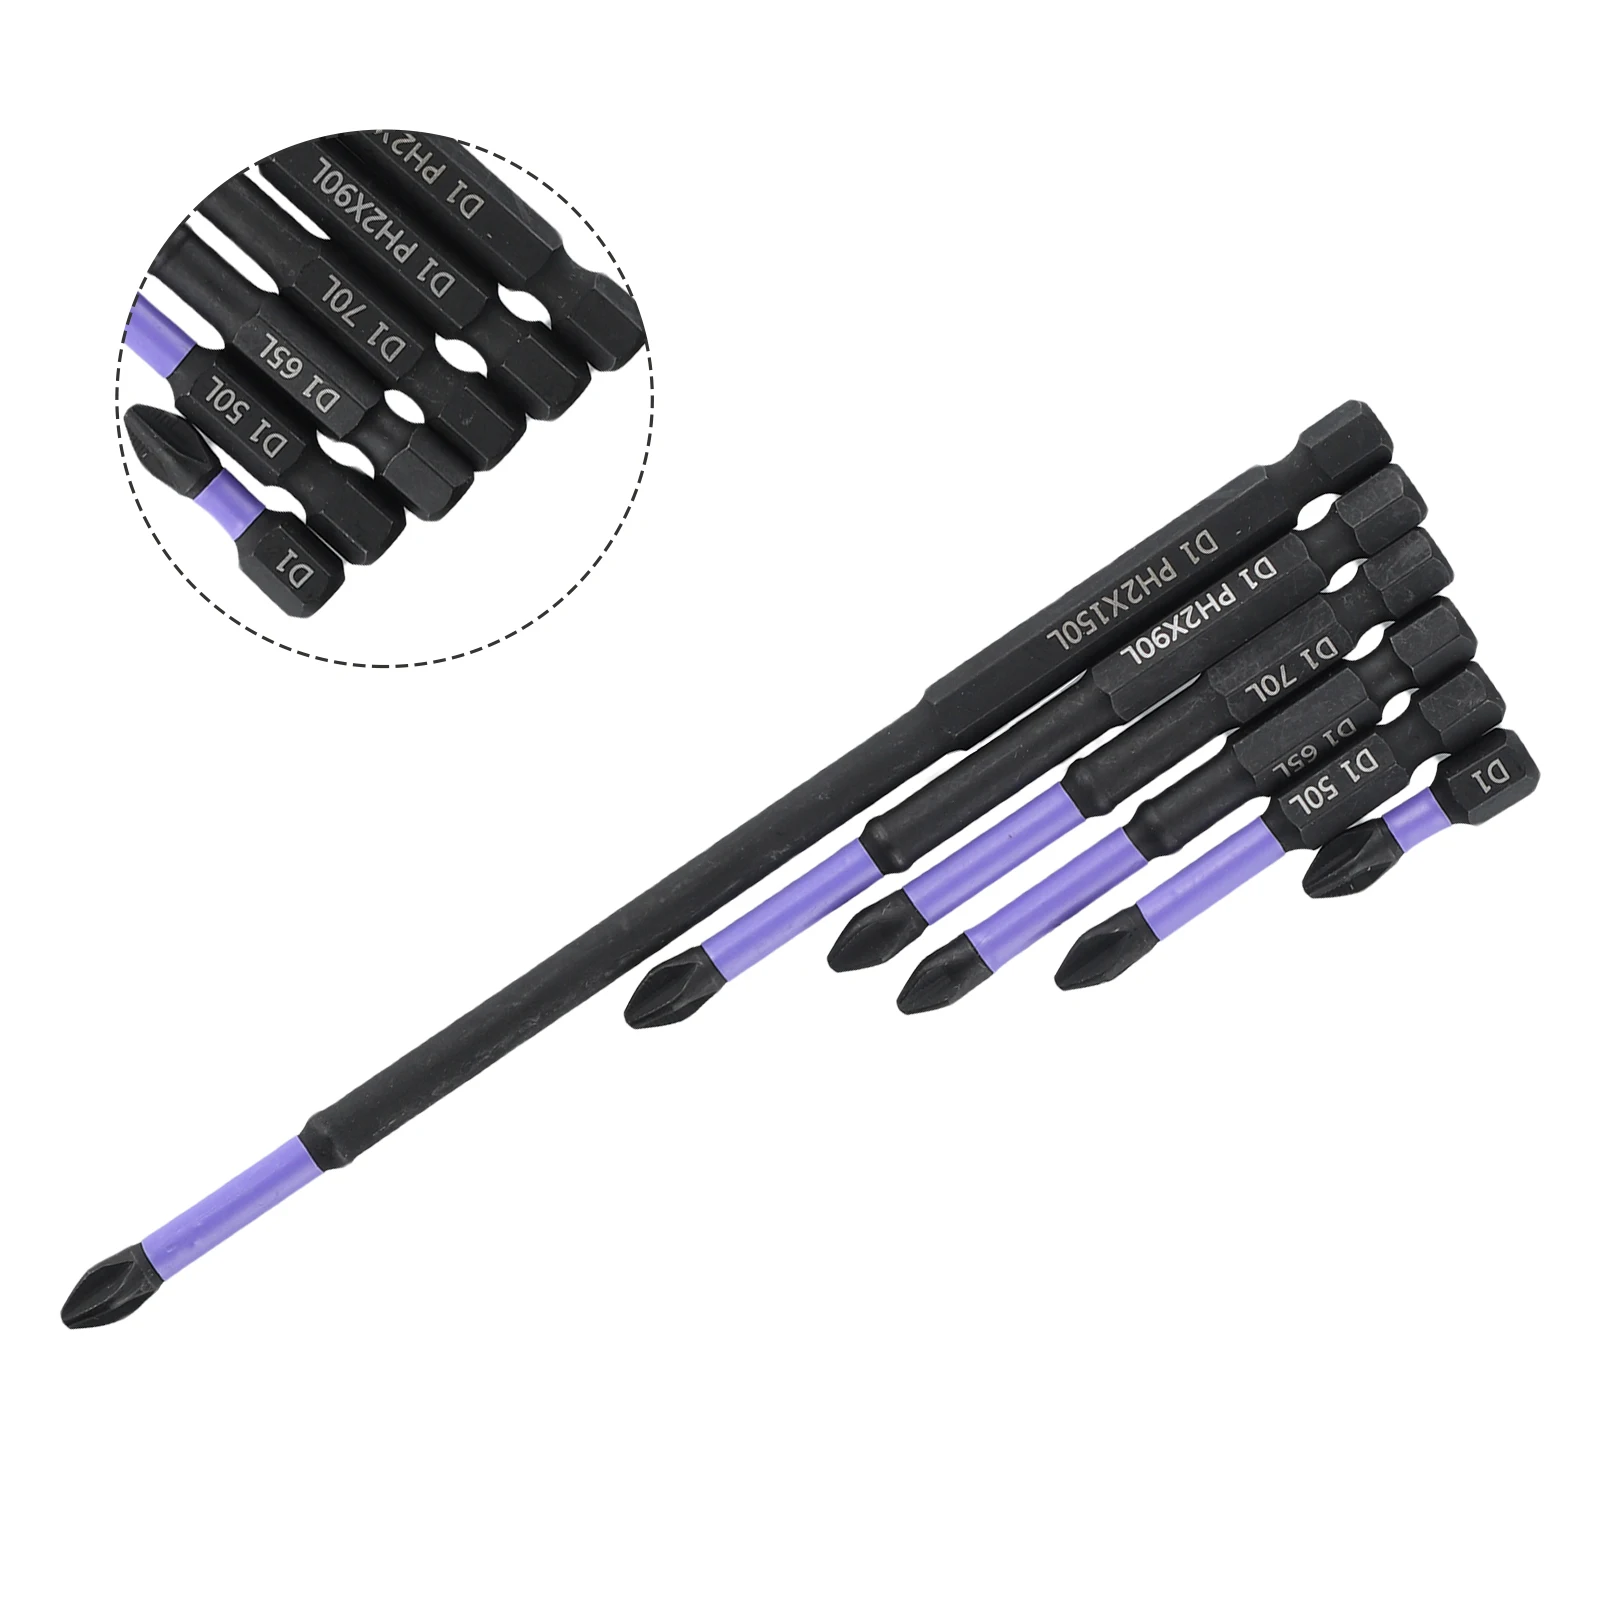 High Toughness 6PCS PH2 Magnetic Batch Head Cross Screwdriver Impact Drill Bit Set 25 150mm for Strong Screw driving Operations